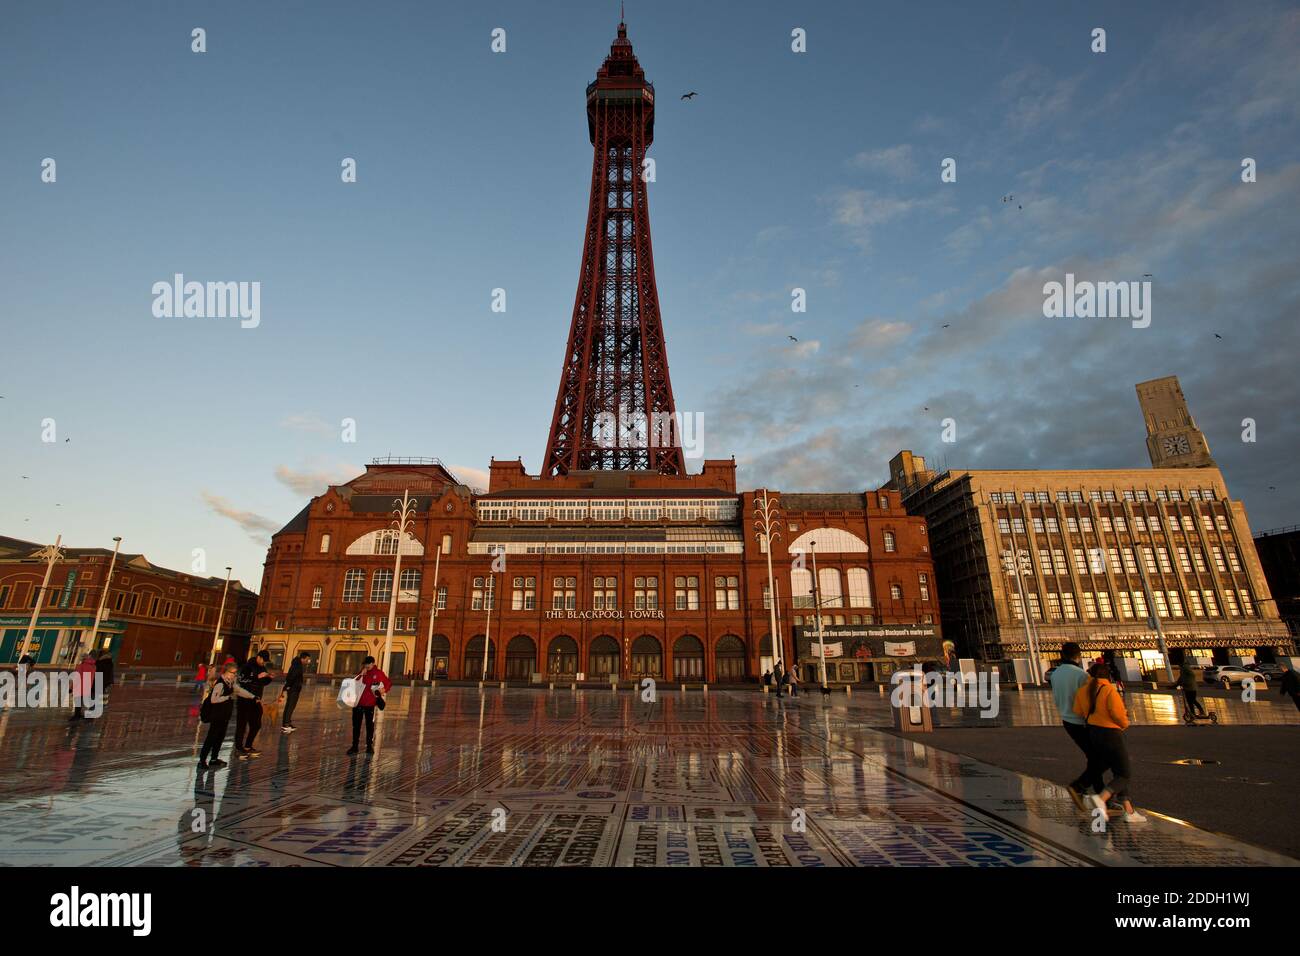 Blackpool Tower Building and Comedy Mappet, dell'artista Gordon Young, in Sunset Time, Blackpool, Inghilterra, UK Foto Stock